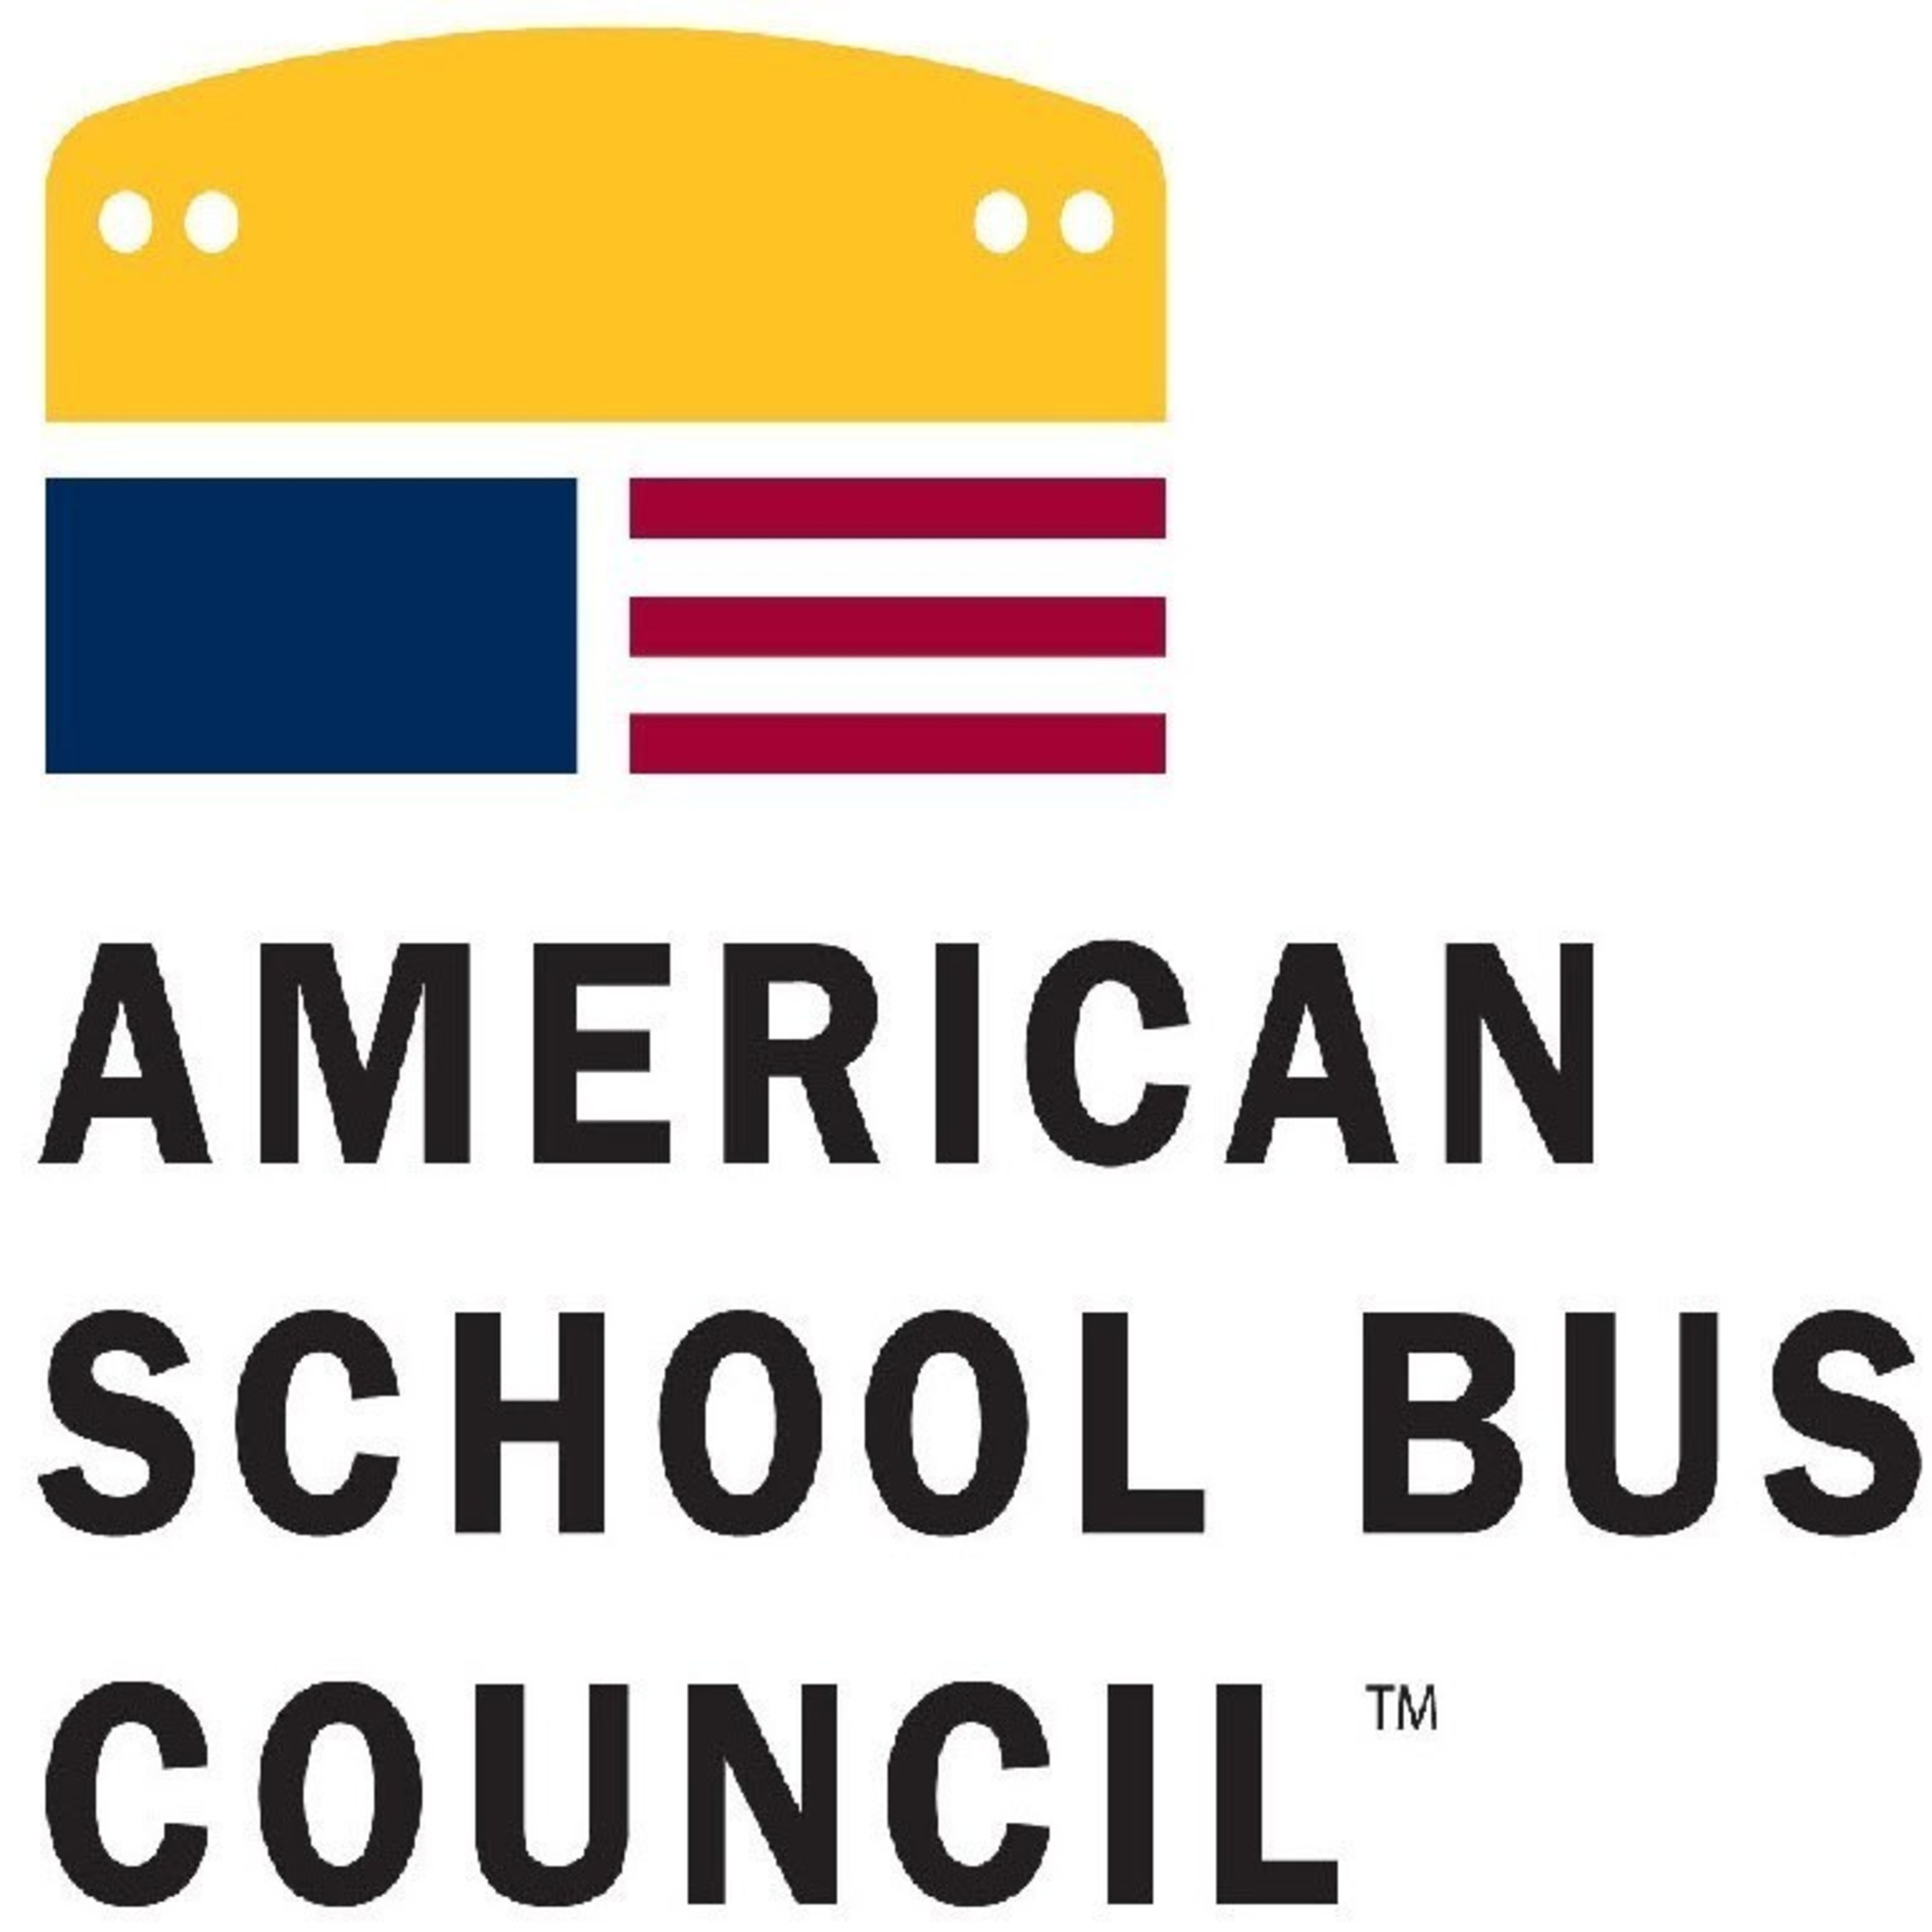 AMERICAN SCHOOL BUS COUNCIL URGES PARENTS TO CHOOSE THE SAFEST FORM OF TRANSPORTATION THIS SCHOOL YEAR